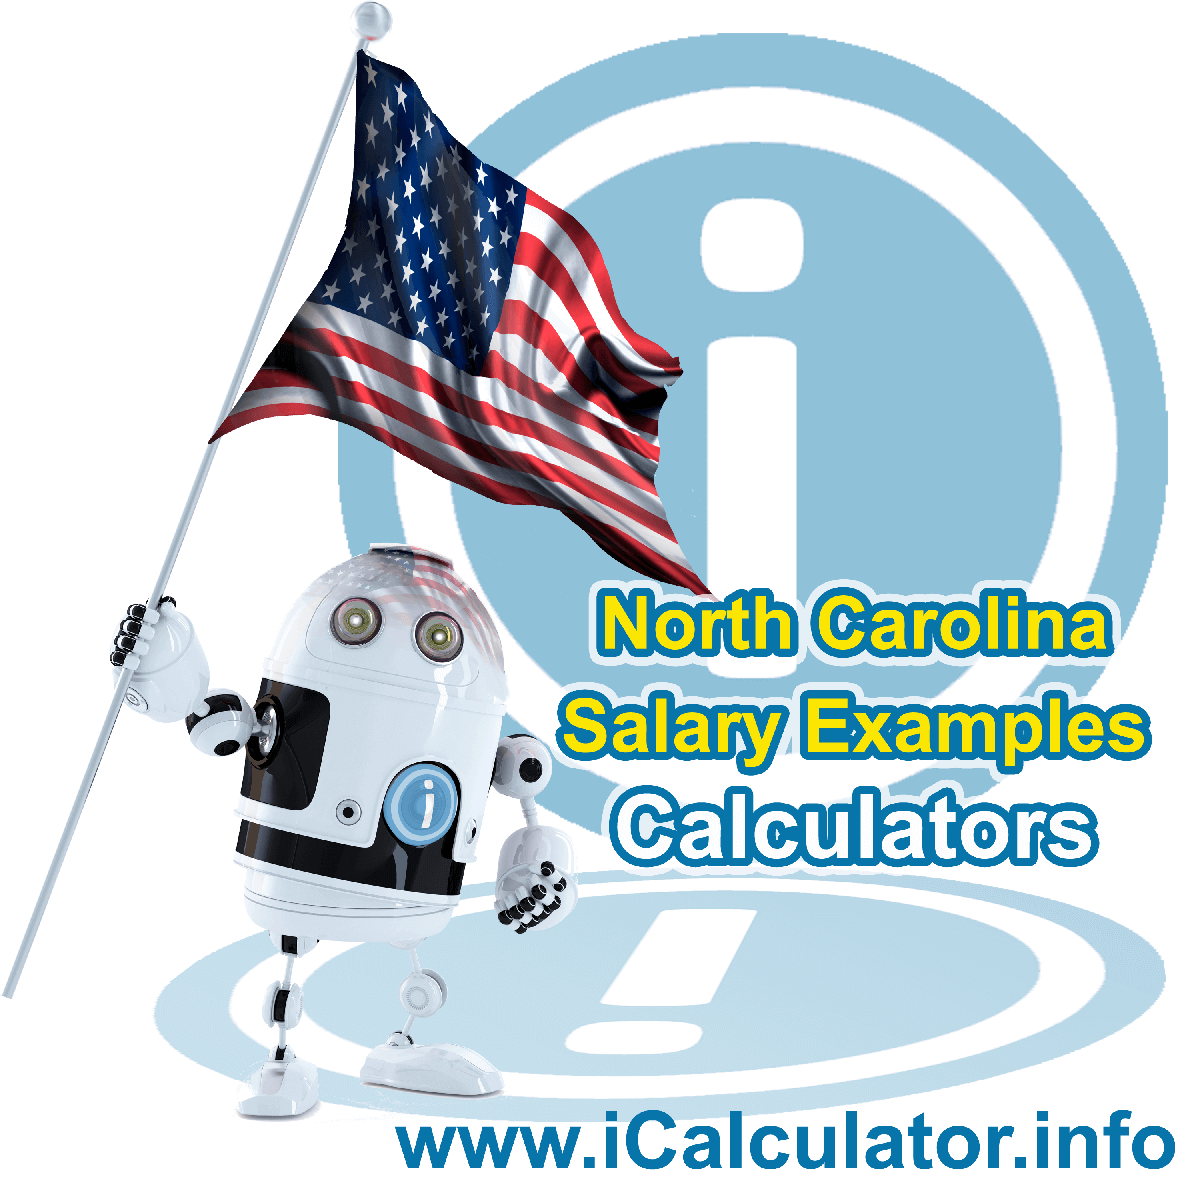 North Carolina Salary Example for $ 180,000.00 in 2023 | iCalculator™ | $ 180,000.00 salary example for employee and employer paying North Carolina State tincome taxes. Detailed salary after tax calculation including North Carolina State Tax, Federal State Tax, Medicare Deductions, Social Security, Capital Gains and other income tax and salary deductions complete with supporting North Carolina state tax tables 